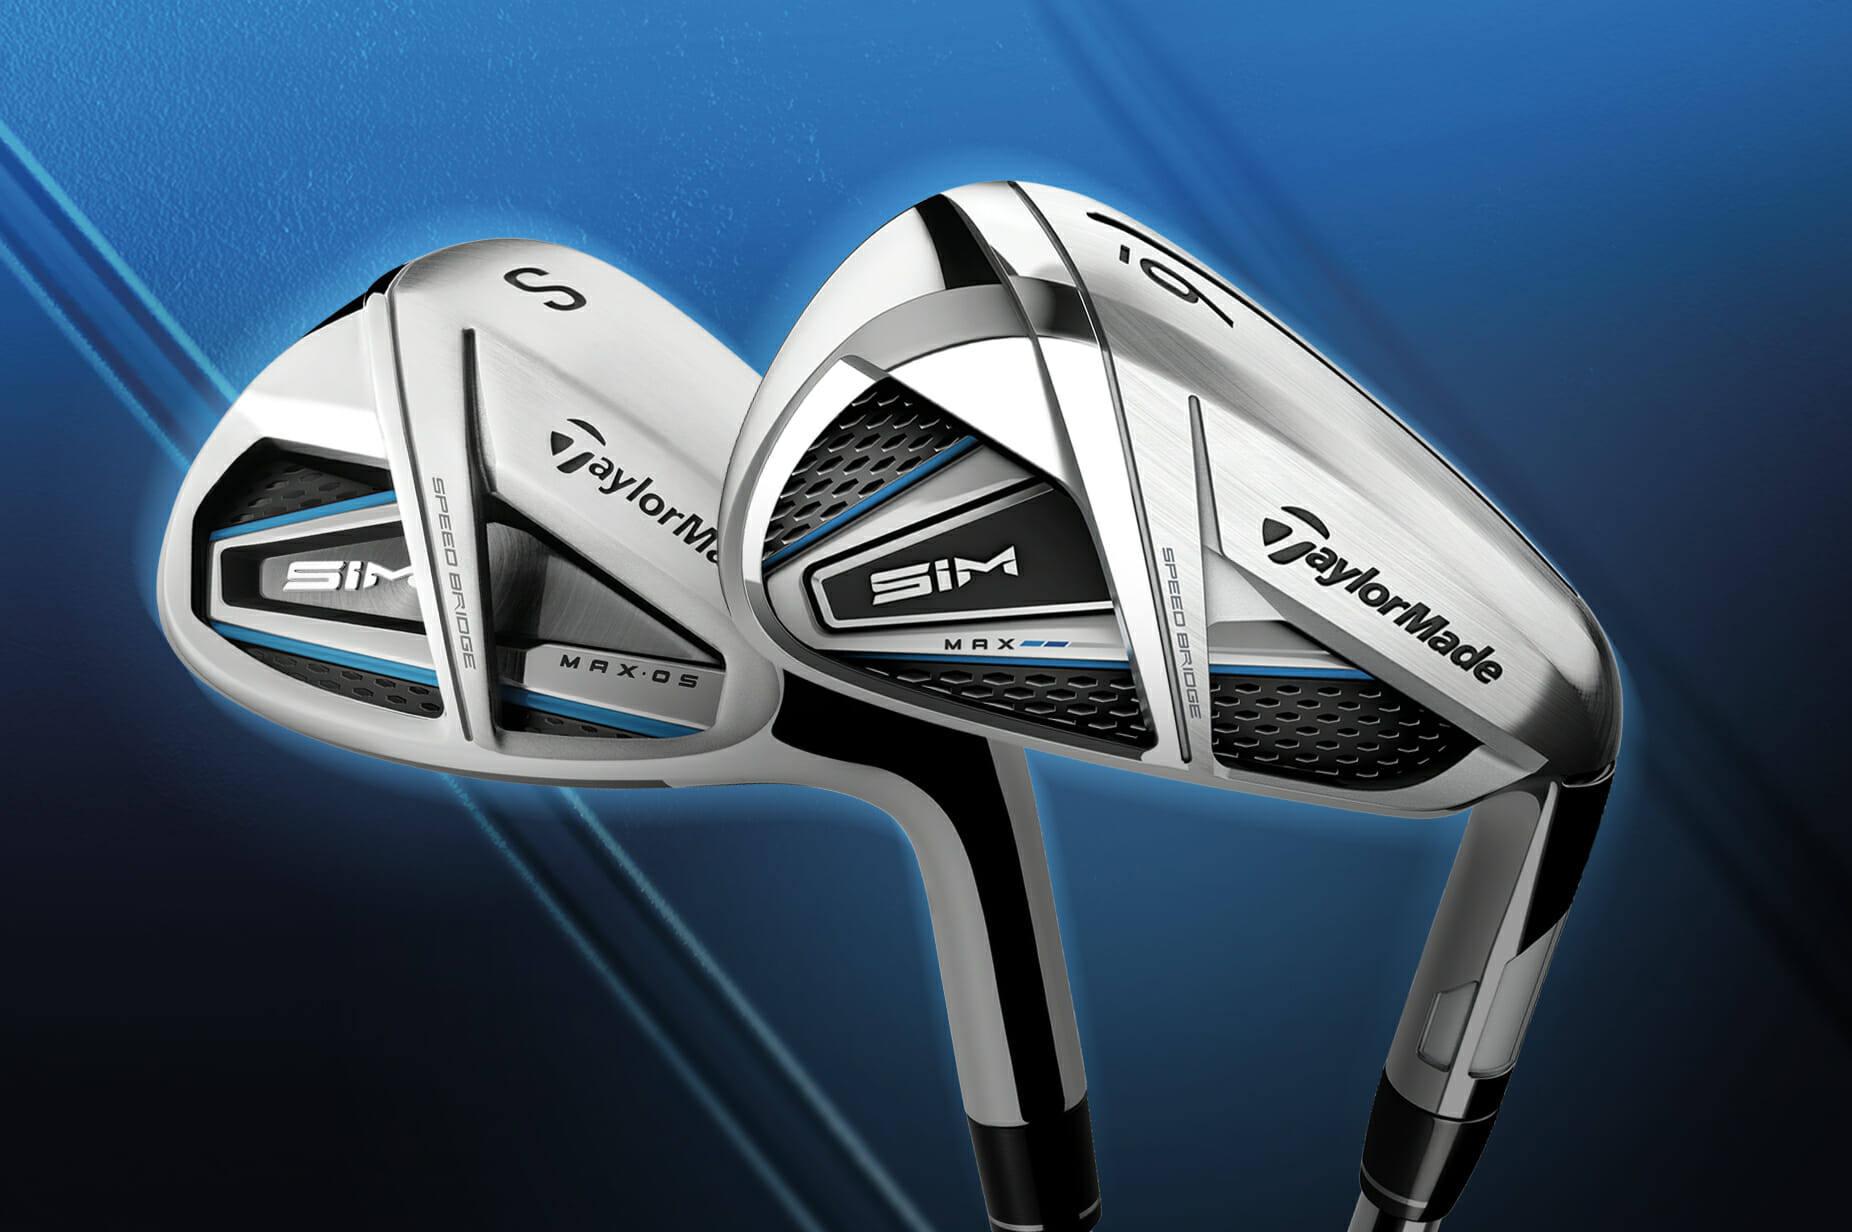 TaylorMade Golf Announces SIM Max and SIM Max OS Irons